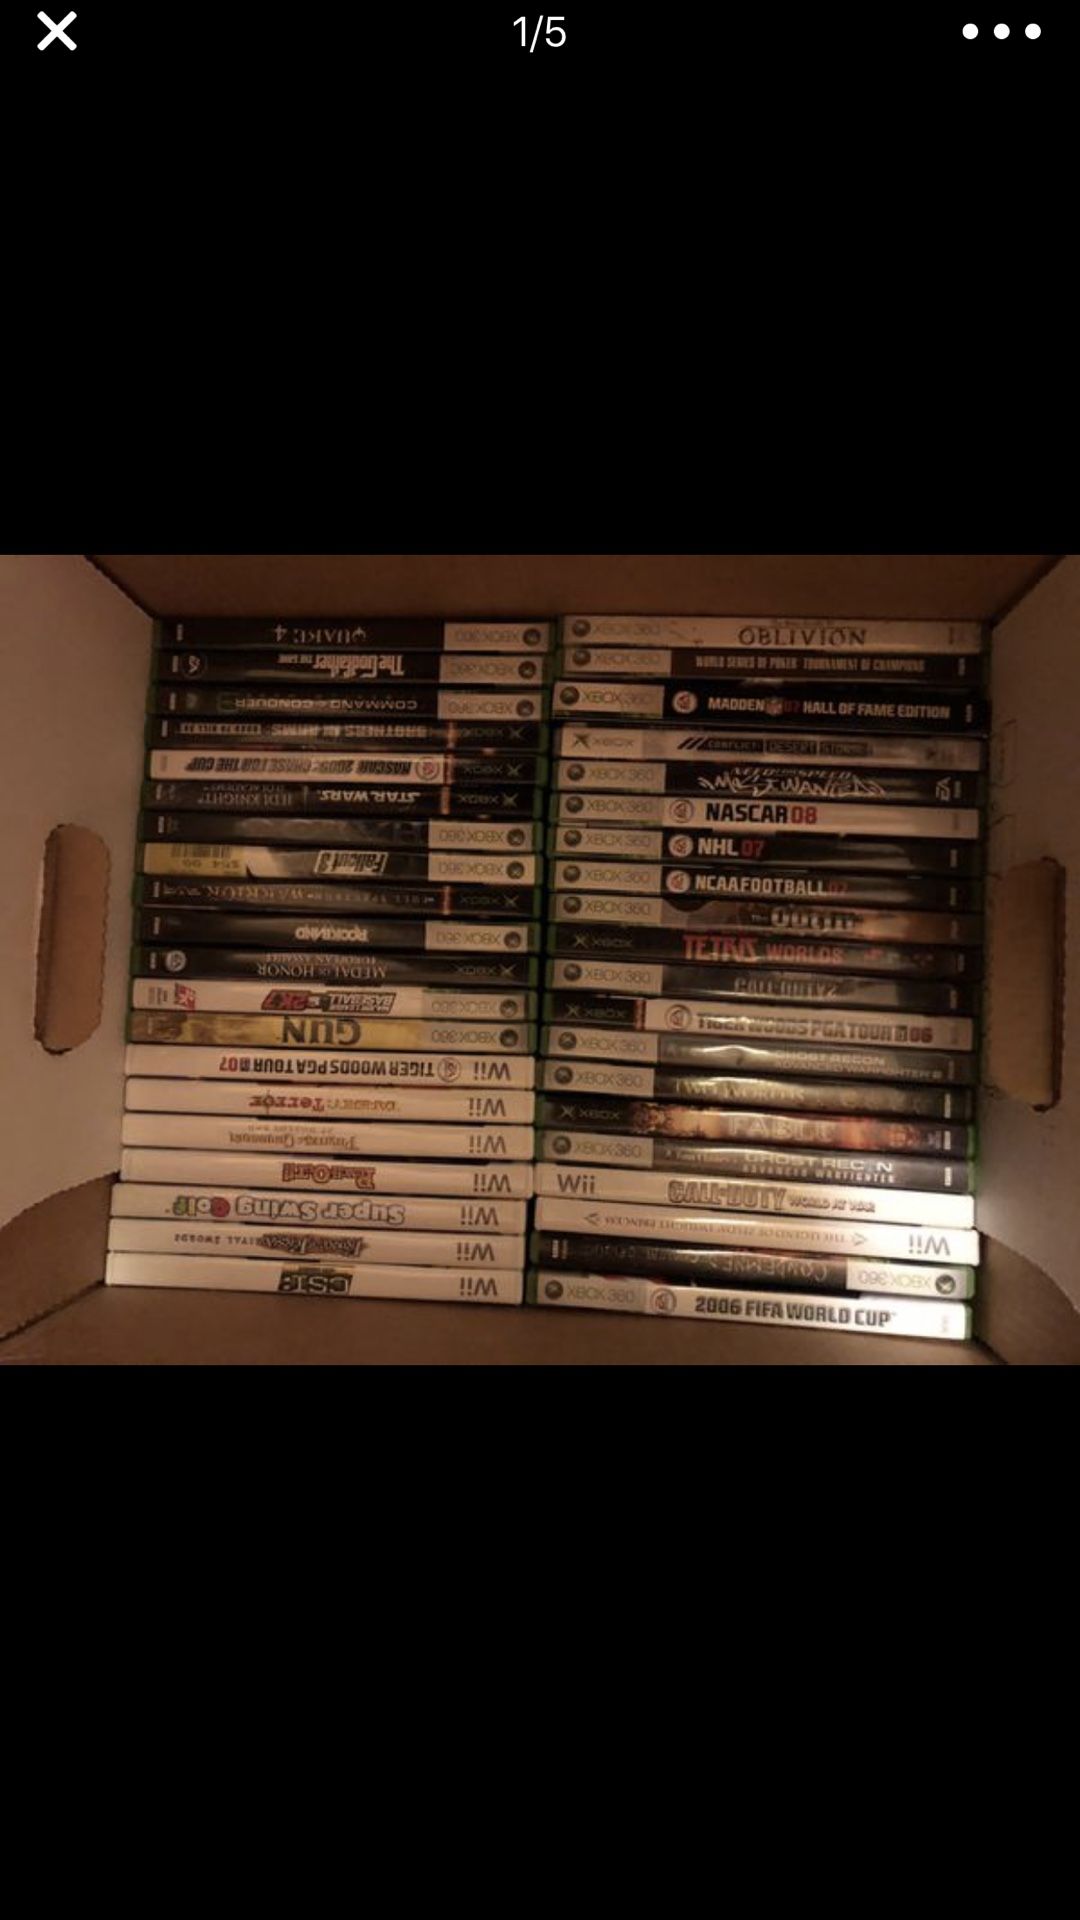 Wii Xbox and Xbox 360 games